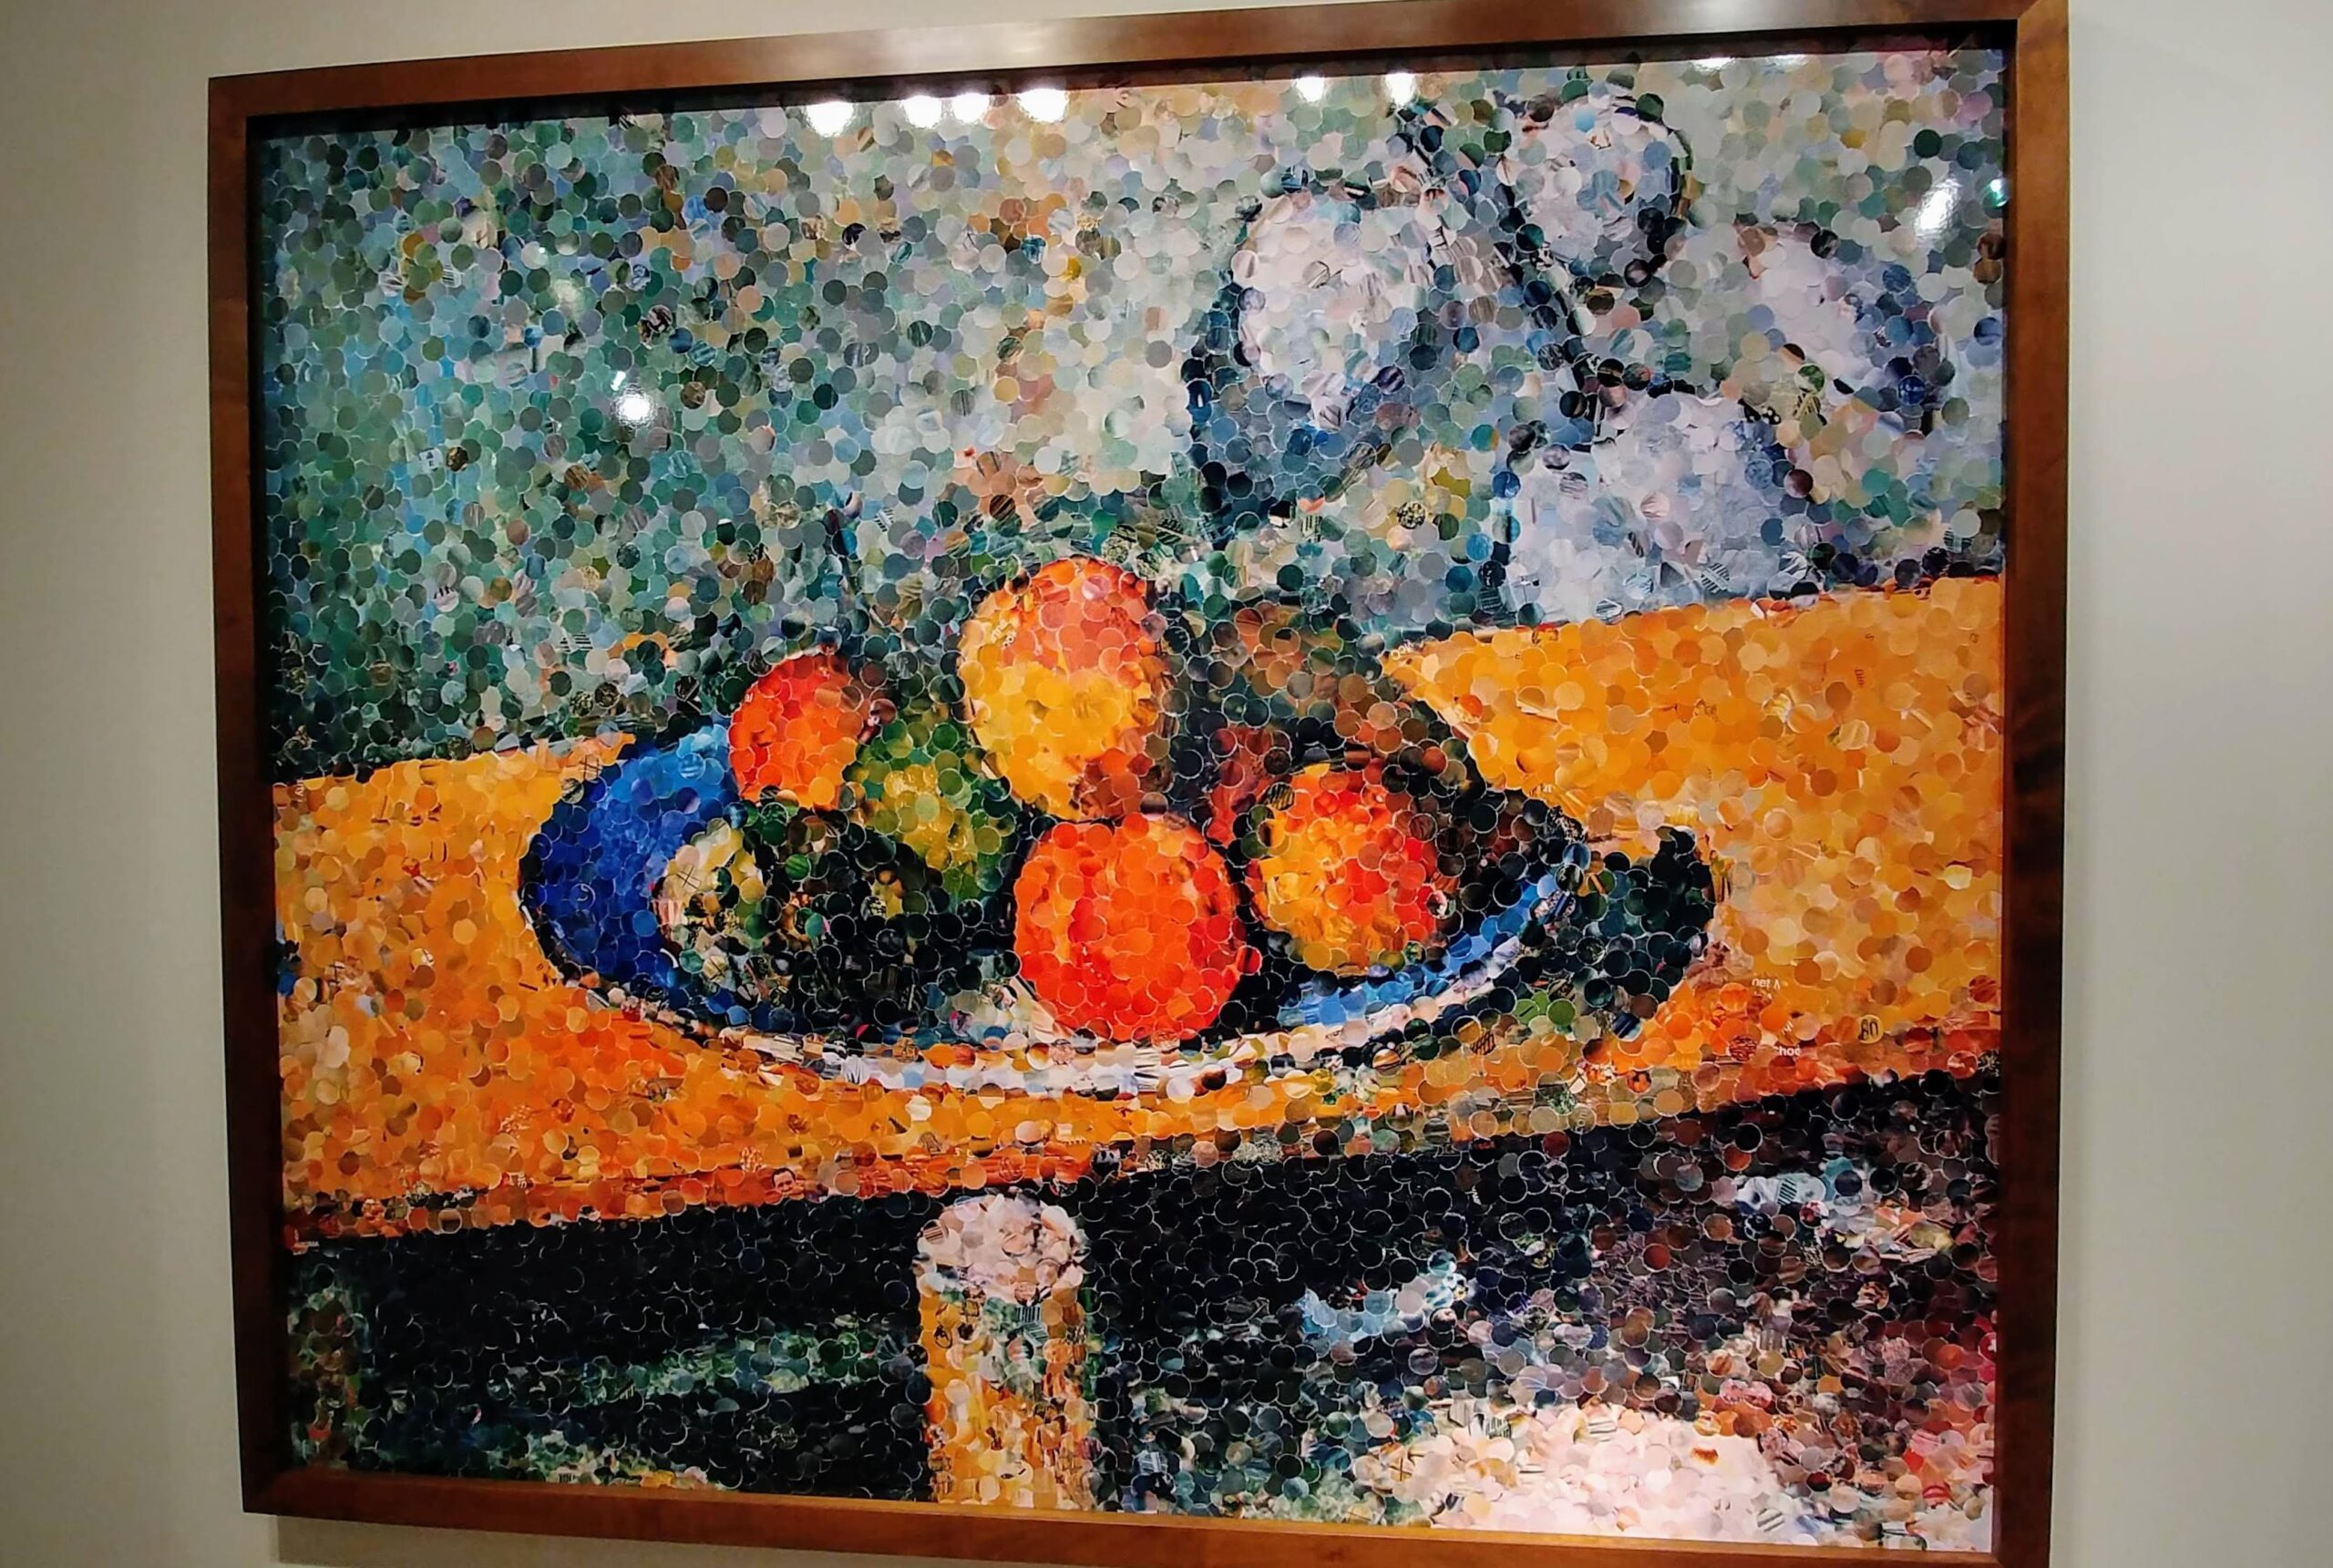 Apples, Peaches, Pears, and Grapes, After Cezanne, 2003 ©Vik Muniz with Rhona Hoffman Gallery, Chicago.